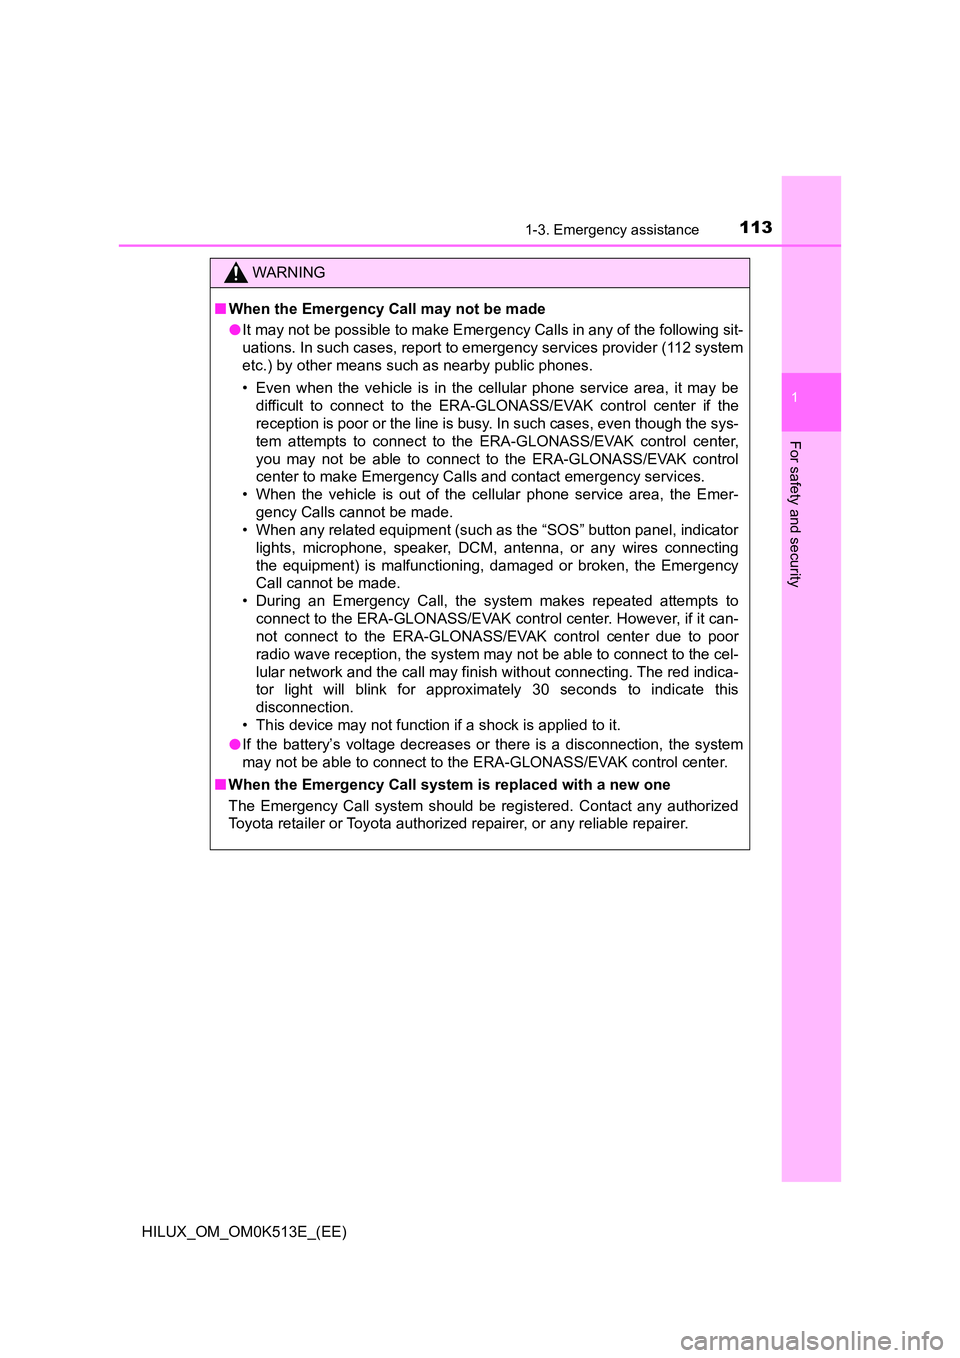 TOYOTA HILUX 2021  Owners Manual (in English) 1131-3. Emergency assistance
1
HILUX_OM_OM0K513E_(EE)
For safety and security
WARNING
�QWhen the Emergency Call may not be made 
�O It may not be possible to make Emergency Calls in any of the followi